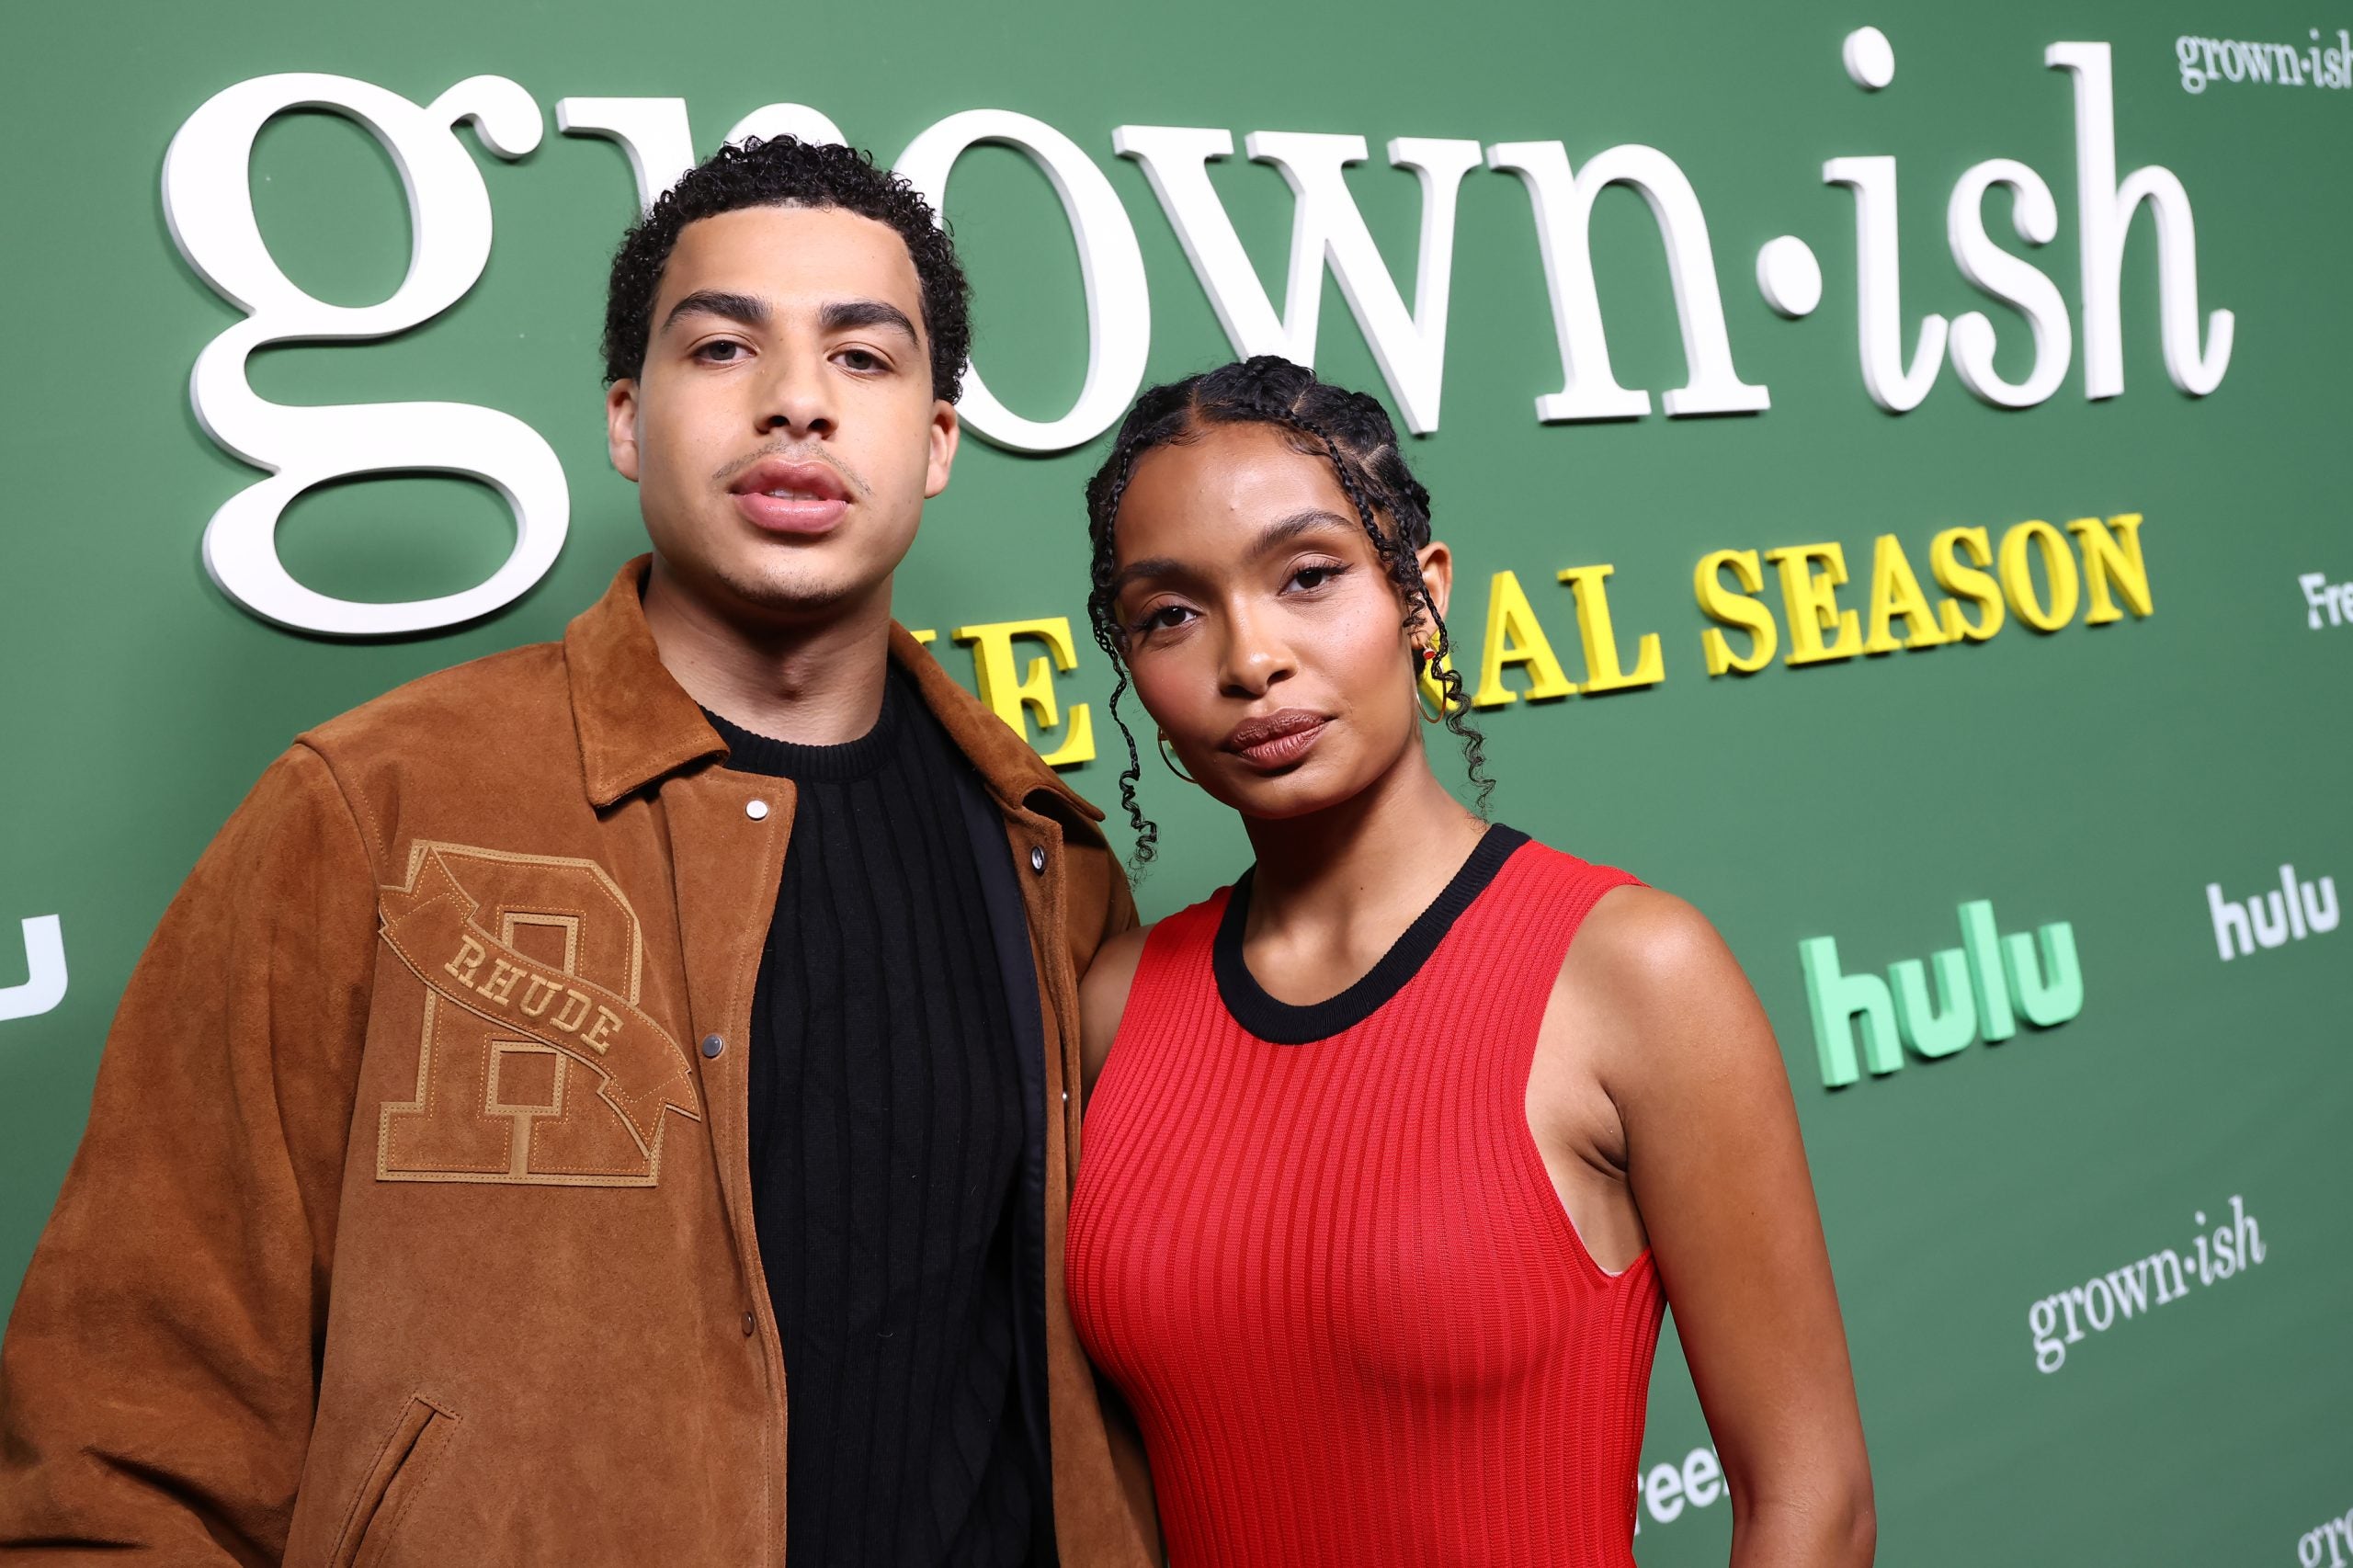 Marcus Scribner Says A Final Farewell To ‘Junior’ With “Grown-ish” Finale